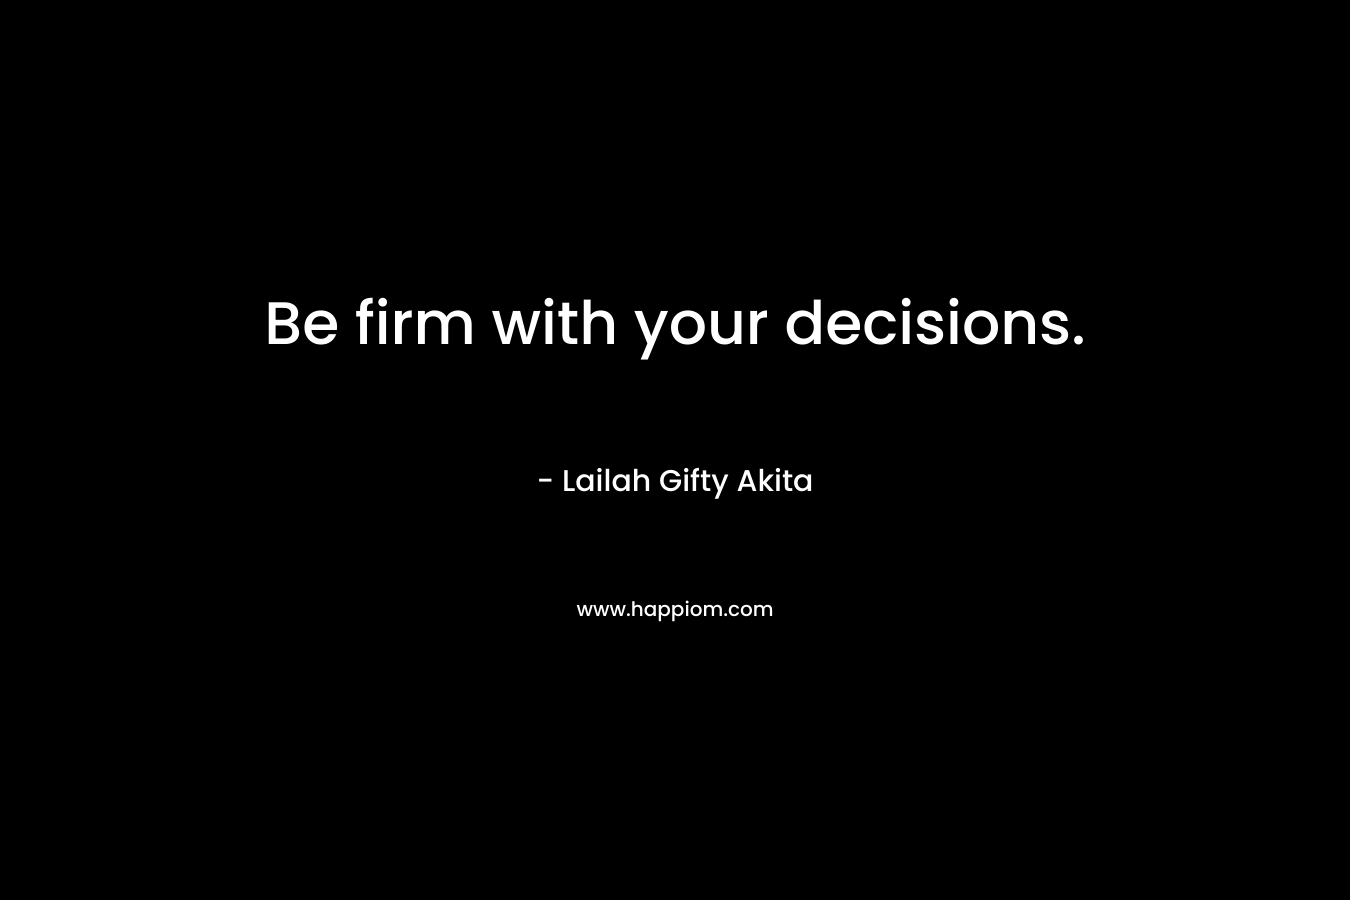 Be firm with your decisions.